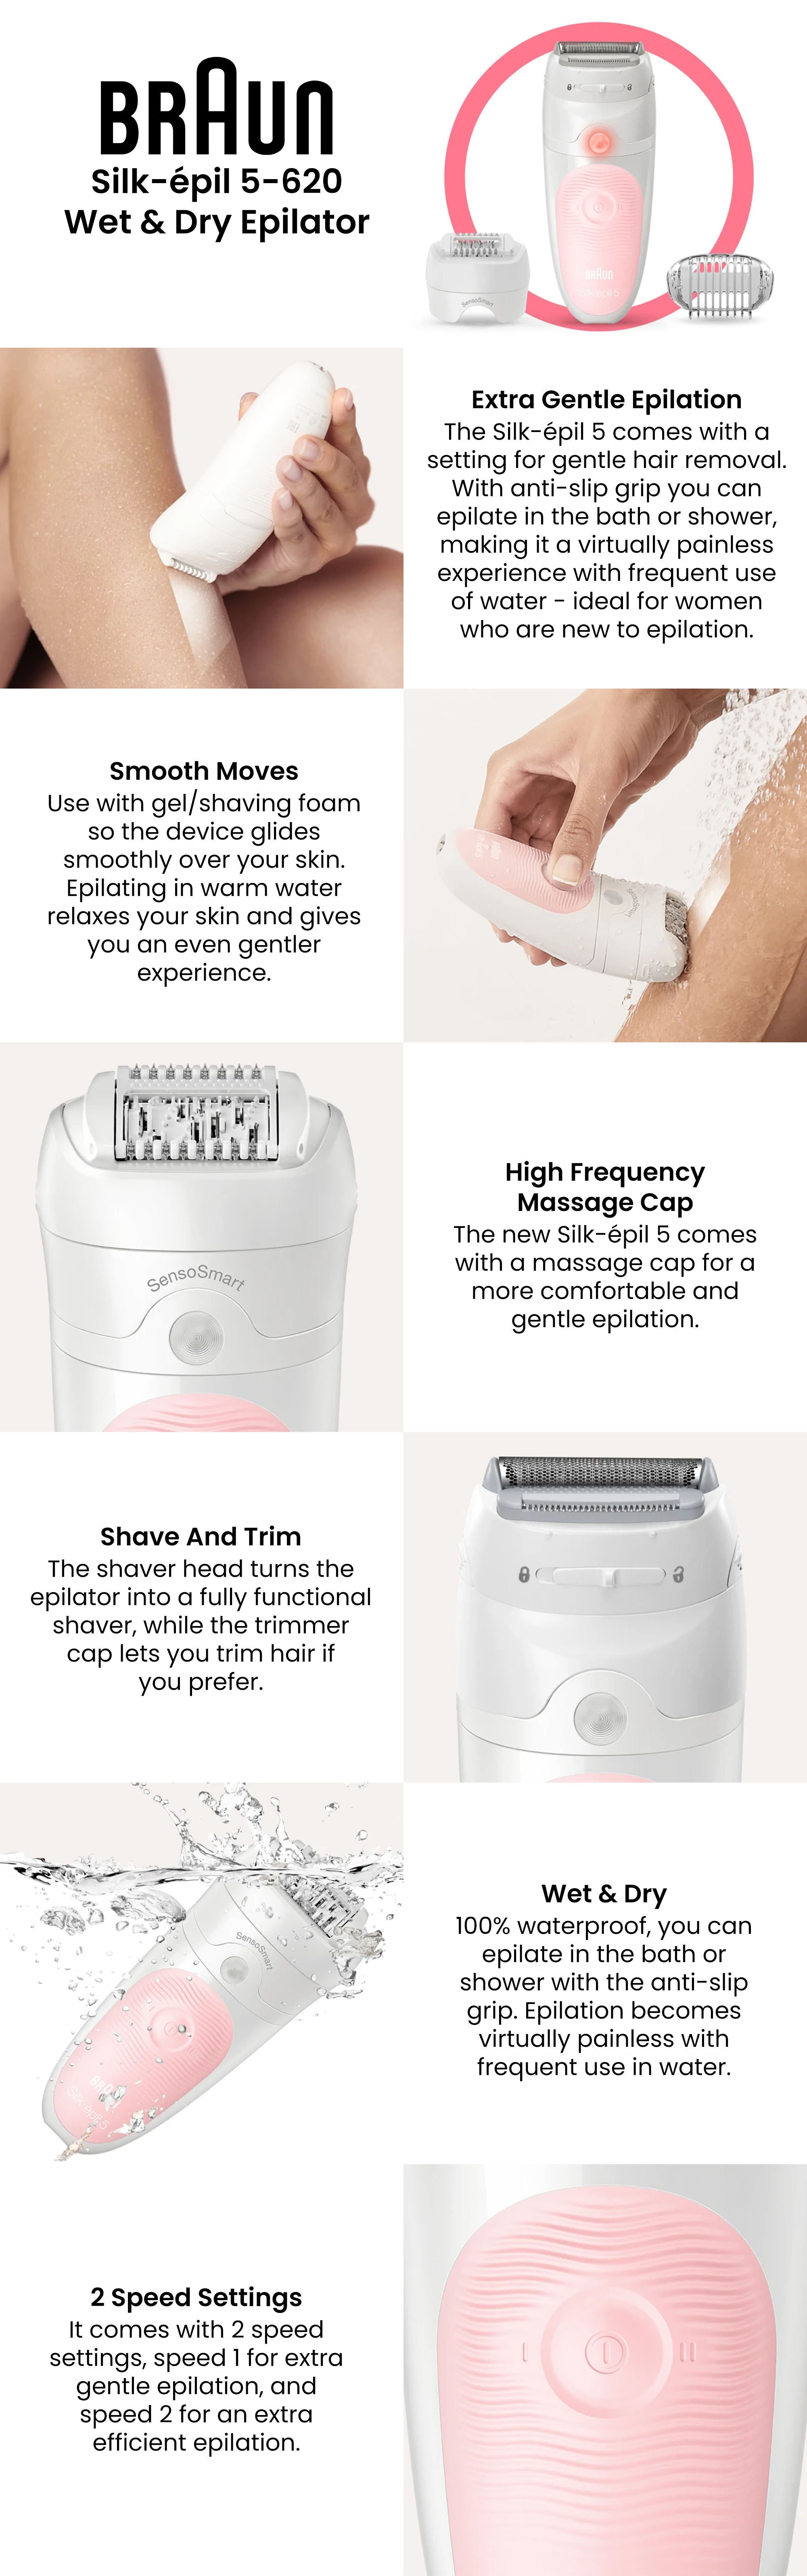 BRAUN Silk-épil 5 5-620 Epilator, Hair Removal, 3 In 1, Includes Shaver &  Trimmer Head, Cordless, Gentle Hair Removal Setting, Wet & Dry, 100%  Waterproof, UK 2 Pin Plug White/Pink Egypt